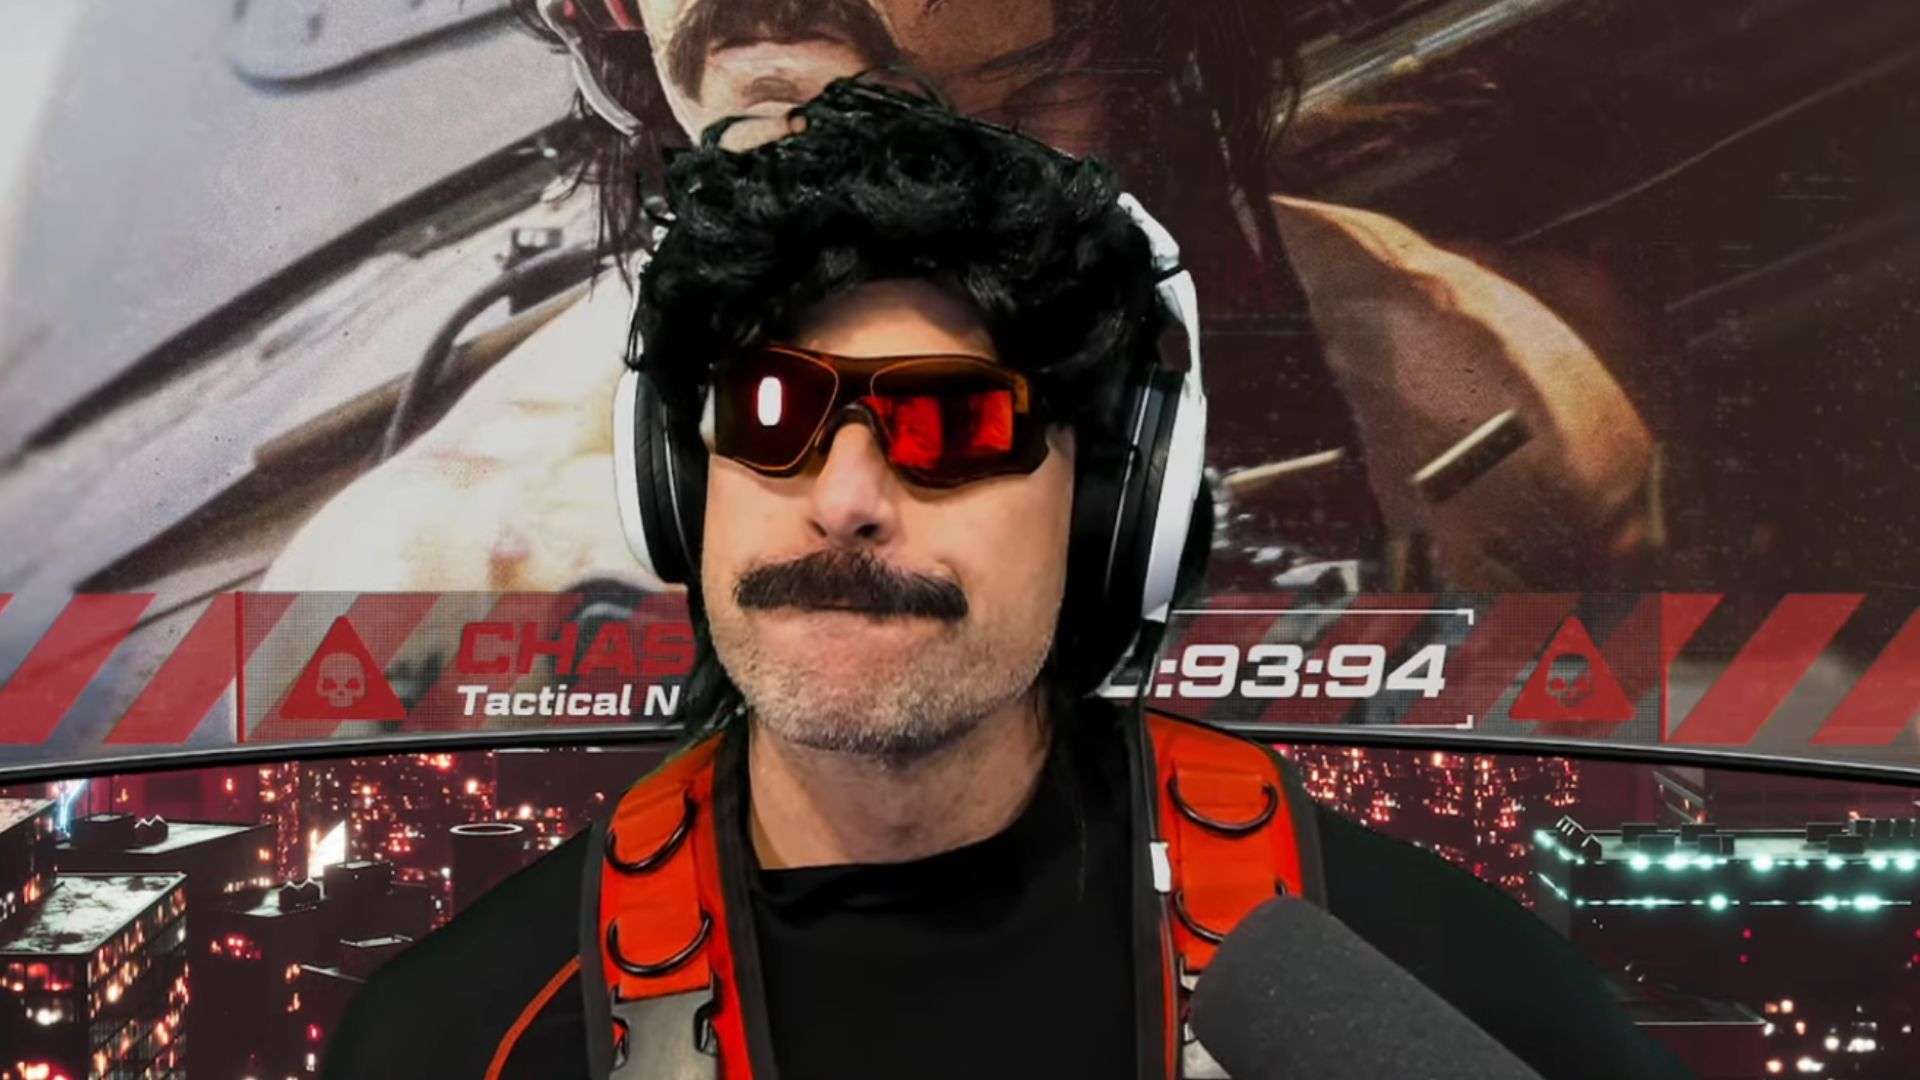 Dr Disrespect looking stern on camera